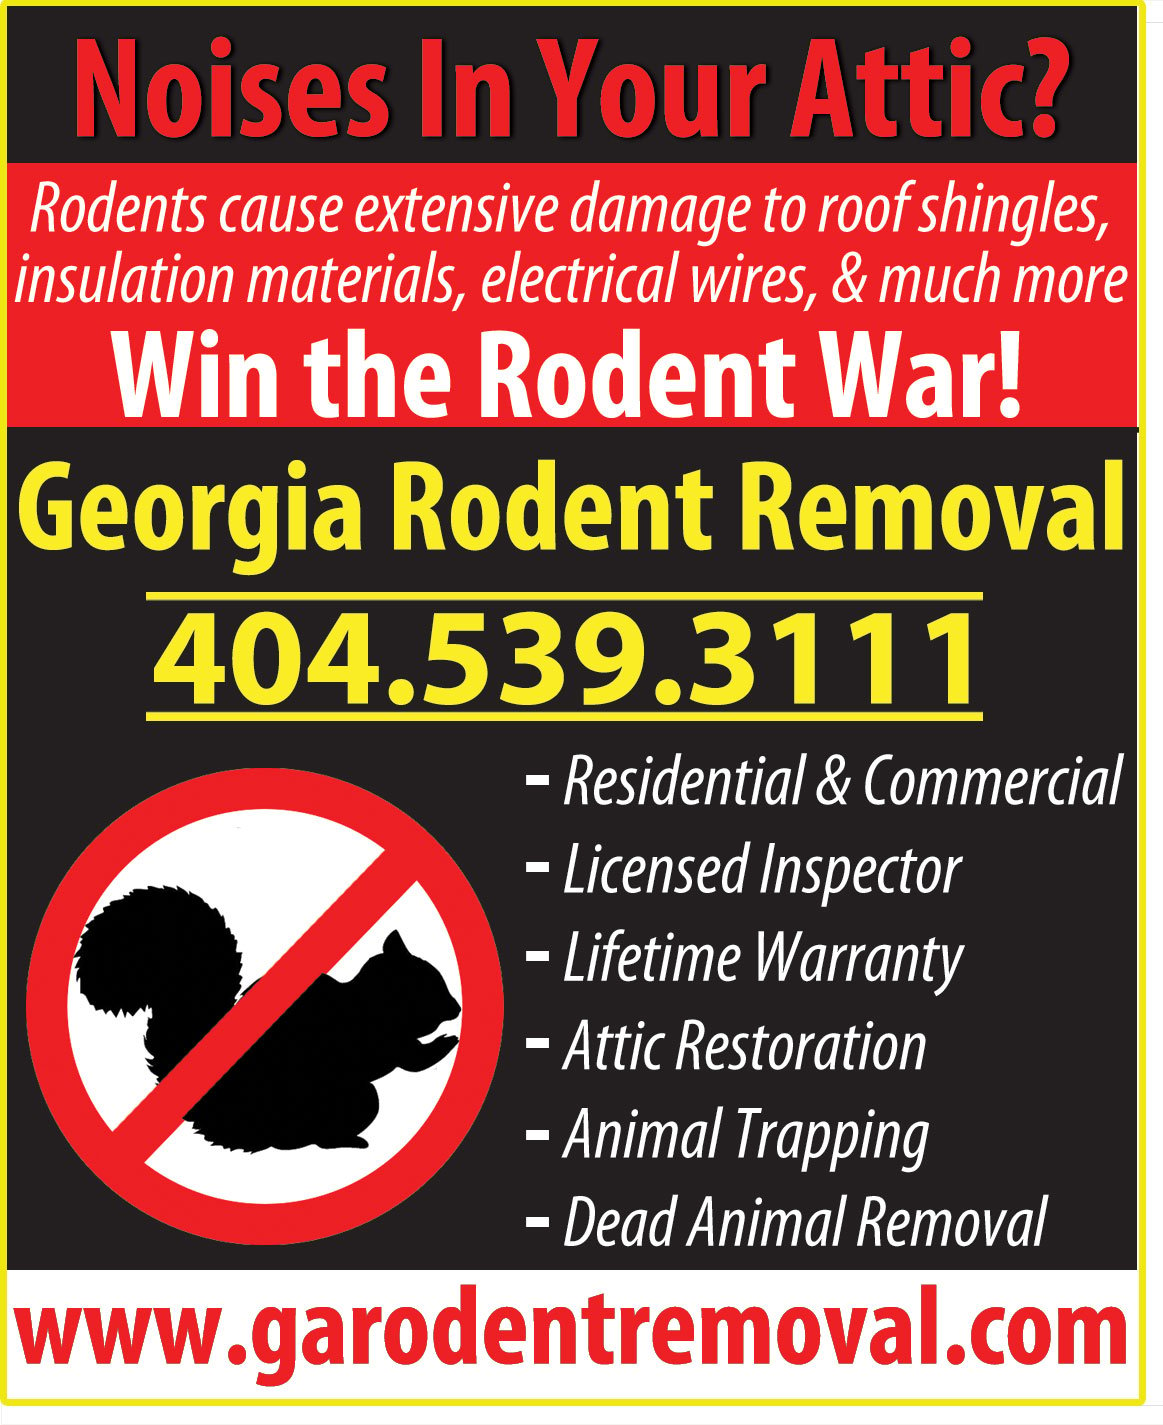 Georgia Rodent Removal Logo